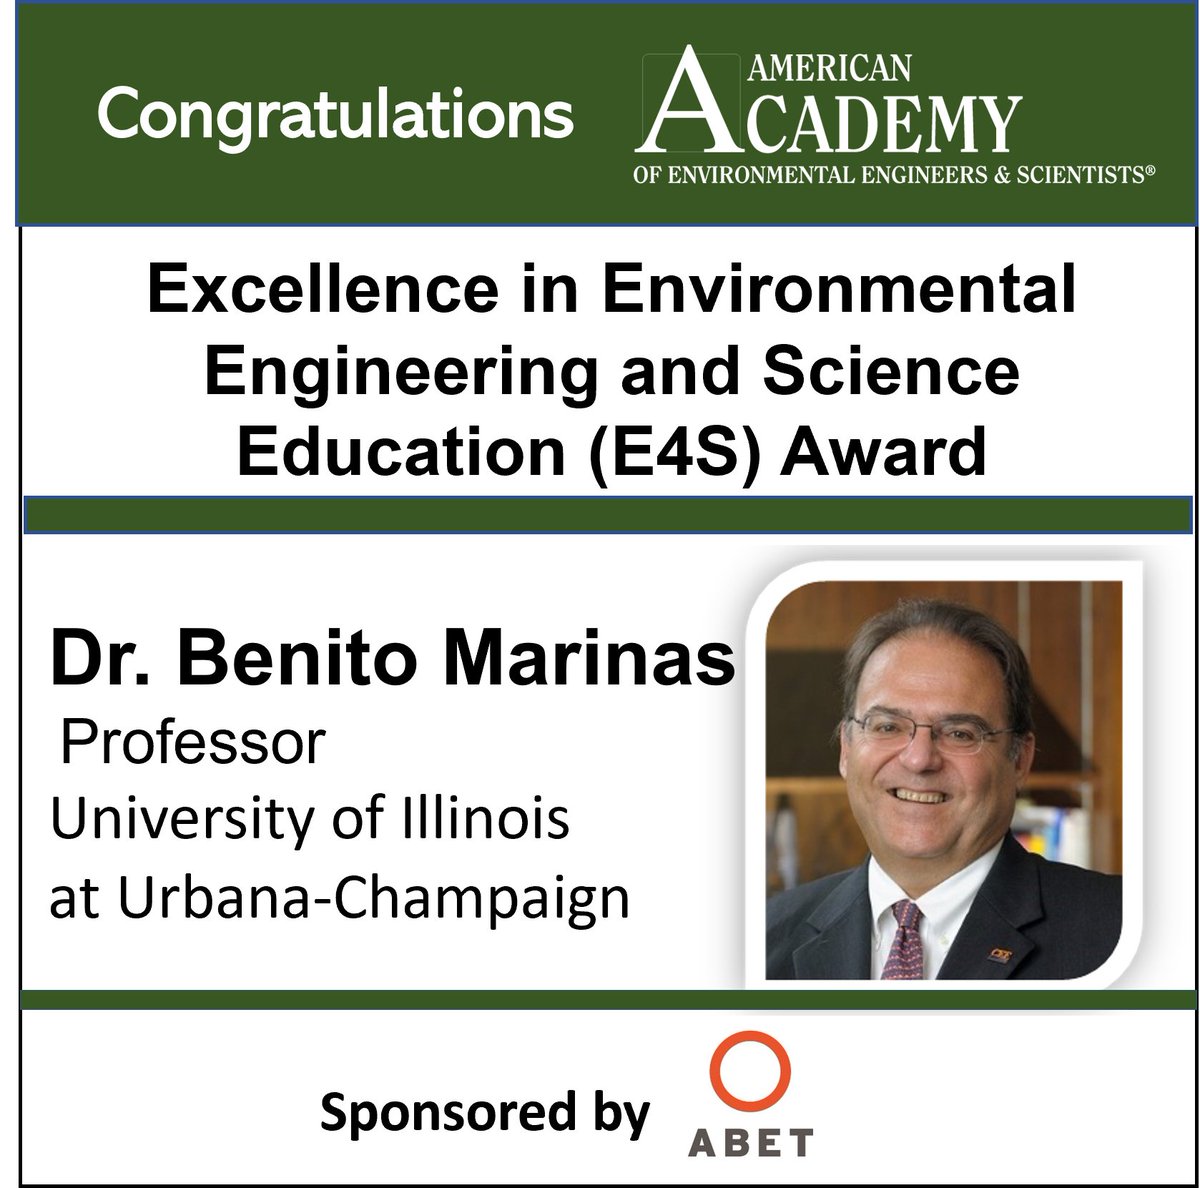 ABET is proud to have sponsored @AAEESdotORG's E4S Award this year, celebrating educators who have made significant contributions to higher education practitioners. Congratulations to Dr. Benito Mariñas!

#environmentalscience #environmentalengineering #highereducation #STEM